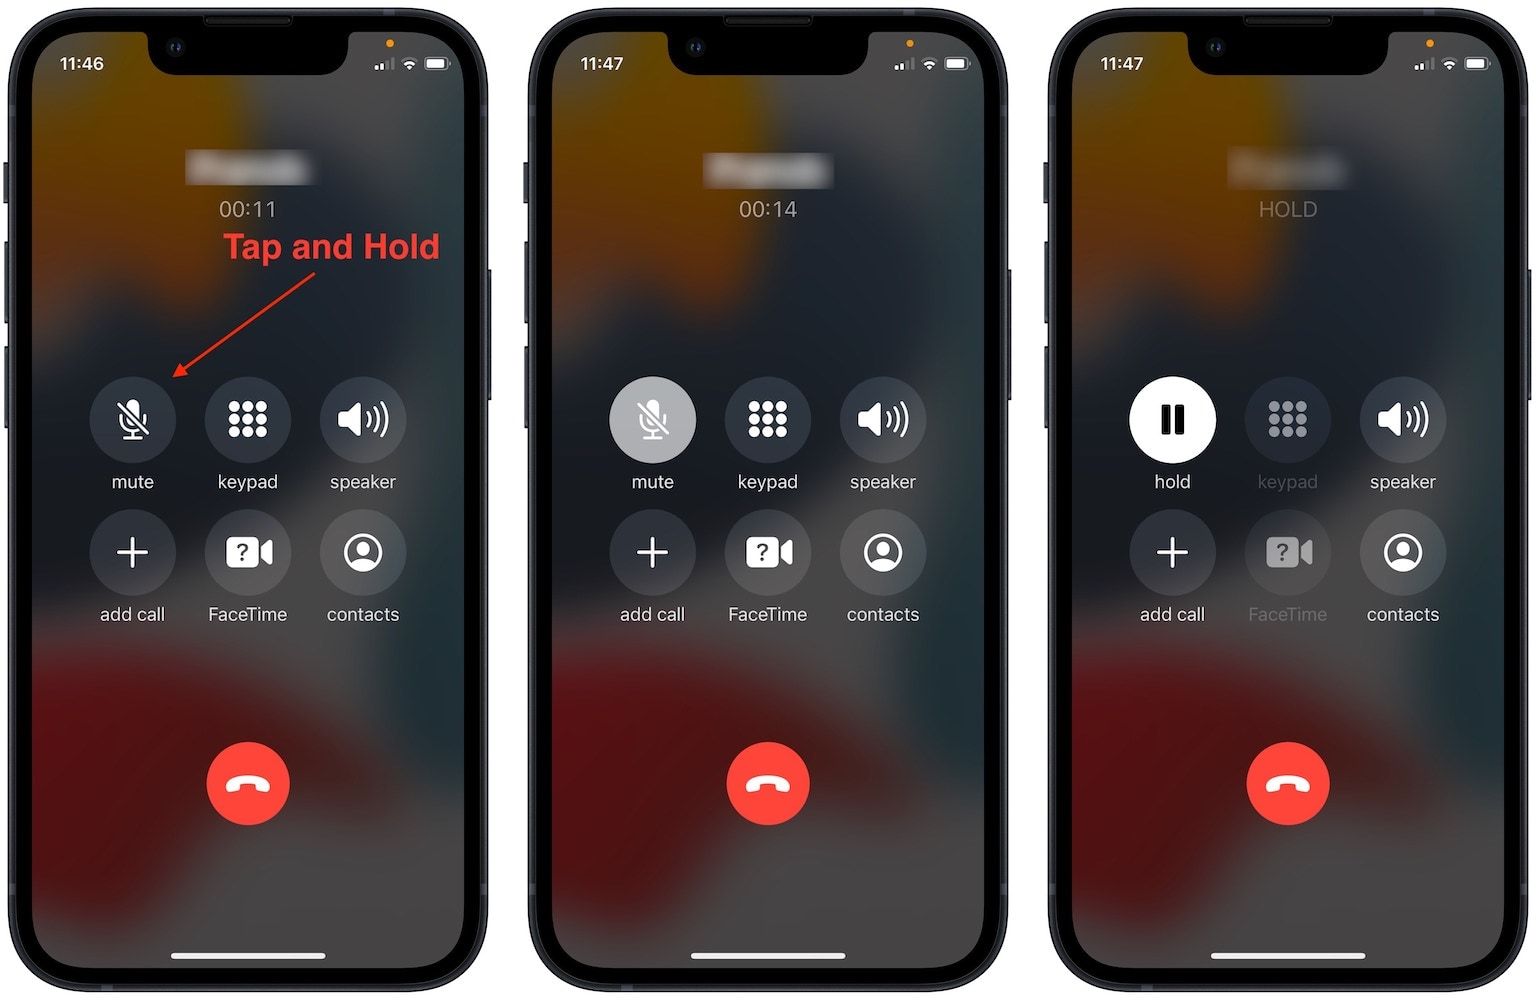 iPhone screenshot showing how to hold a call